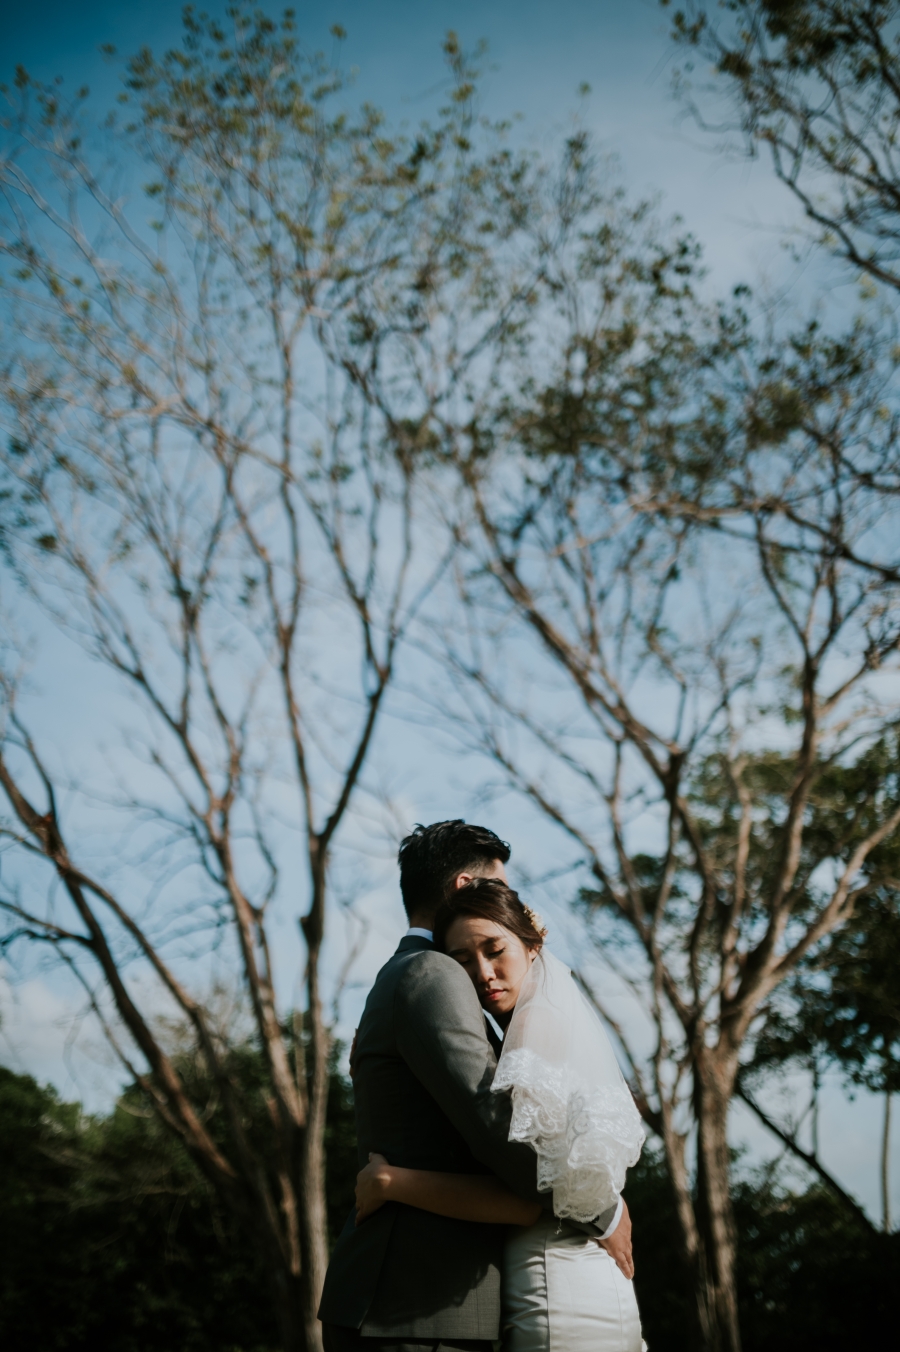 Malaysia Pre-Wedding Photoshoot At Old Streets And Sandy Beach In Johor Bahru by Ed on OneThreeOneFour 13